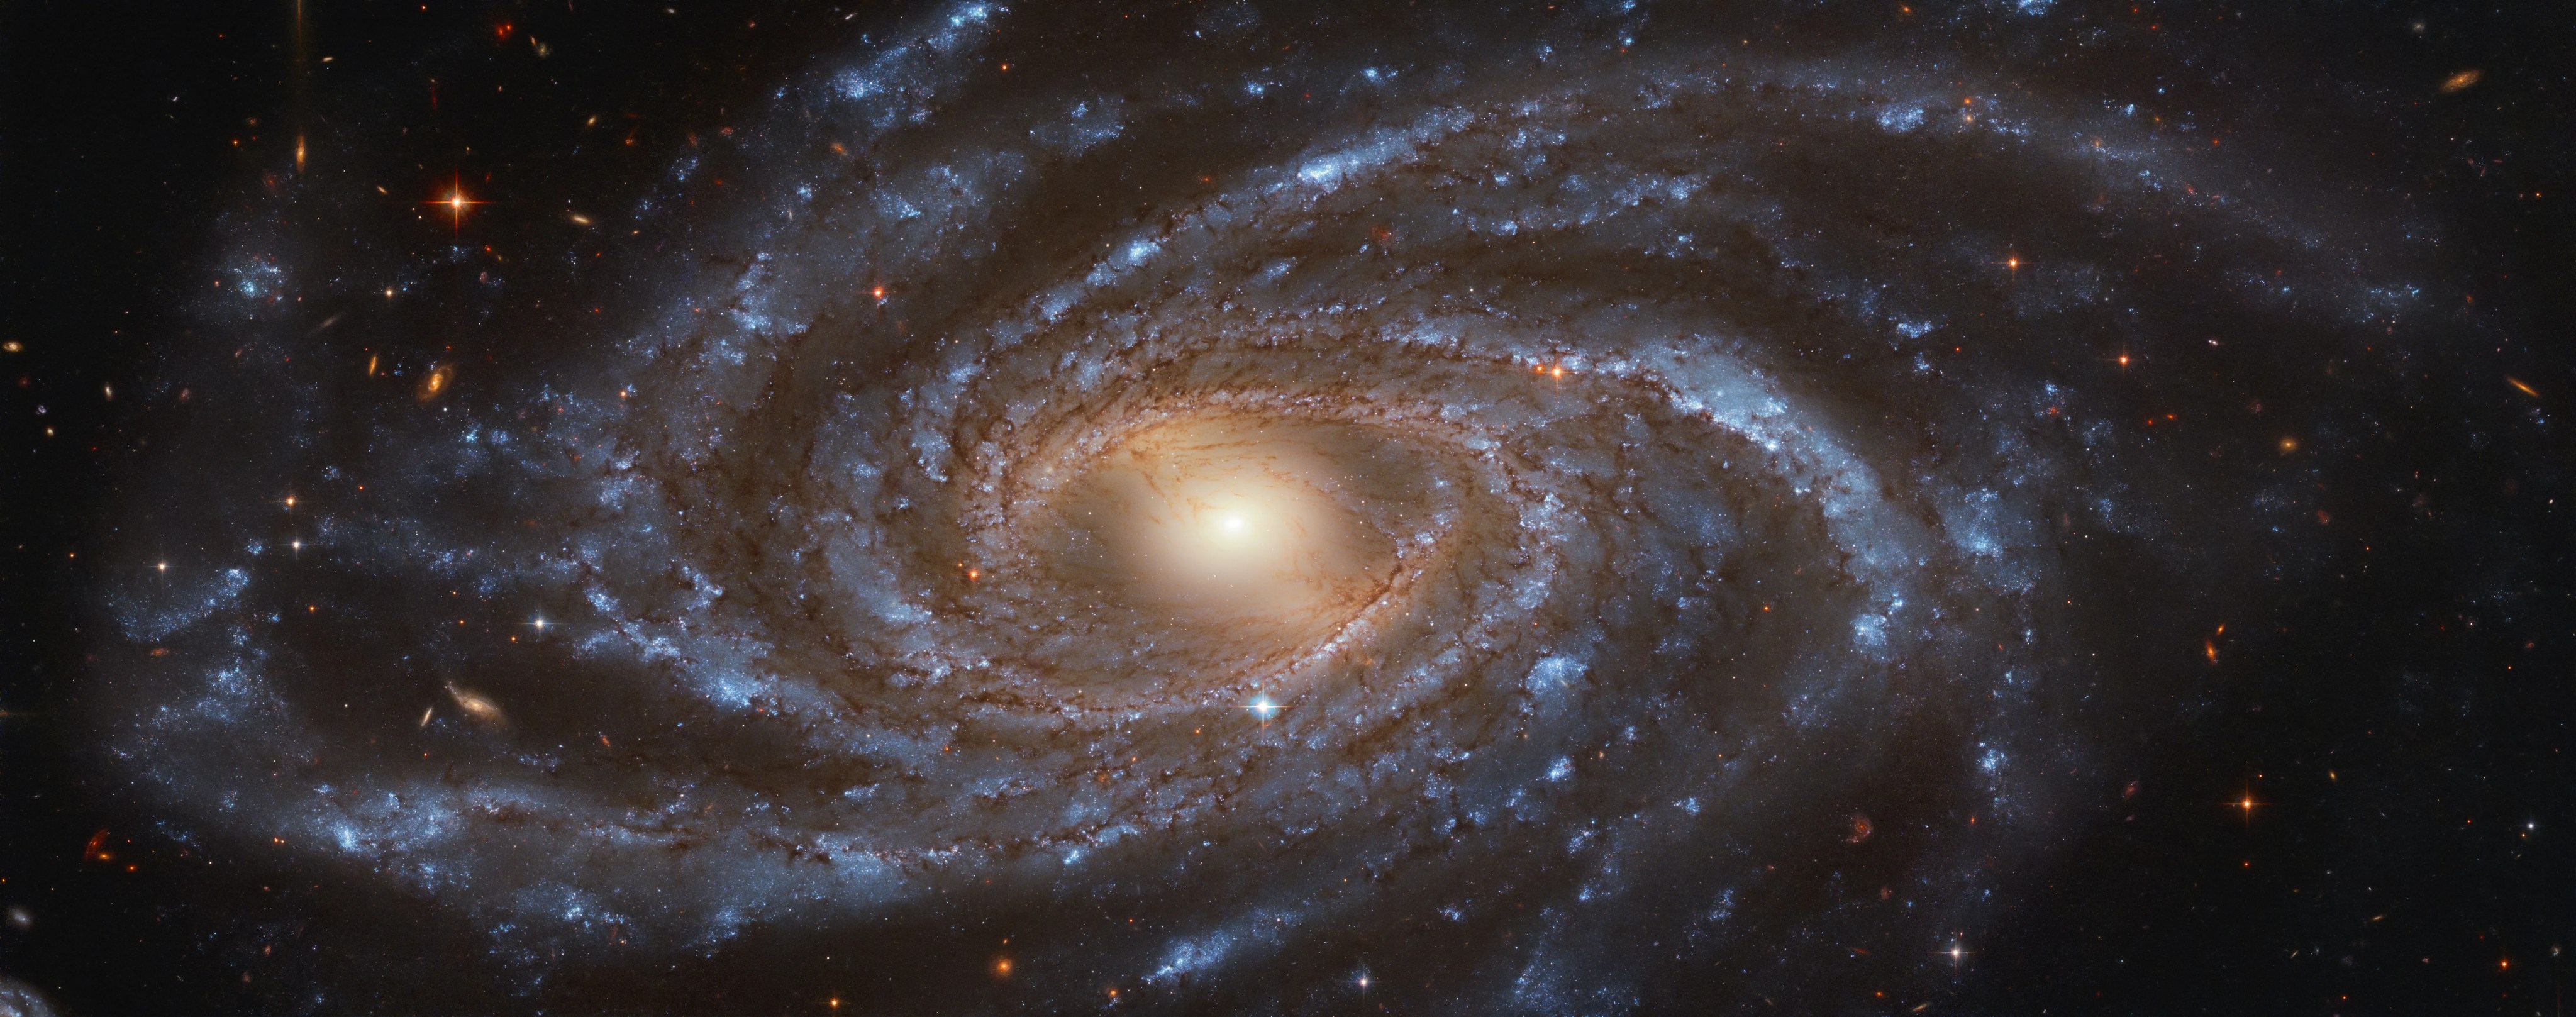 Ngc 2336 is the quintessential galaxy — big, beautiful, and blue — and it is captured here by the nasa/esa hubble telescope.